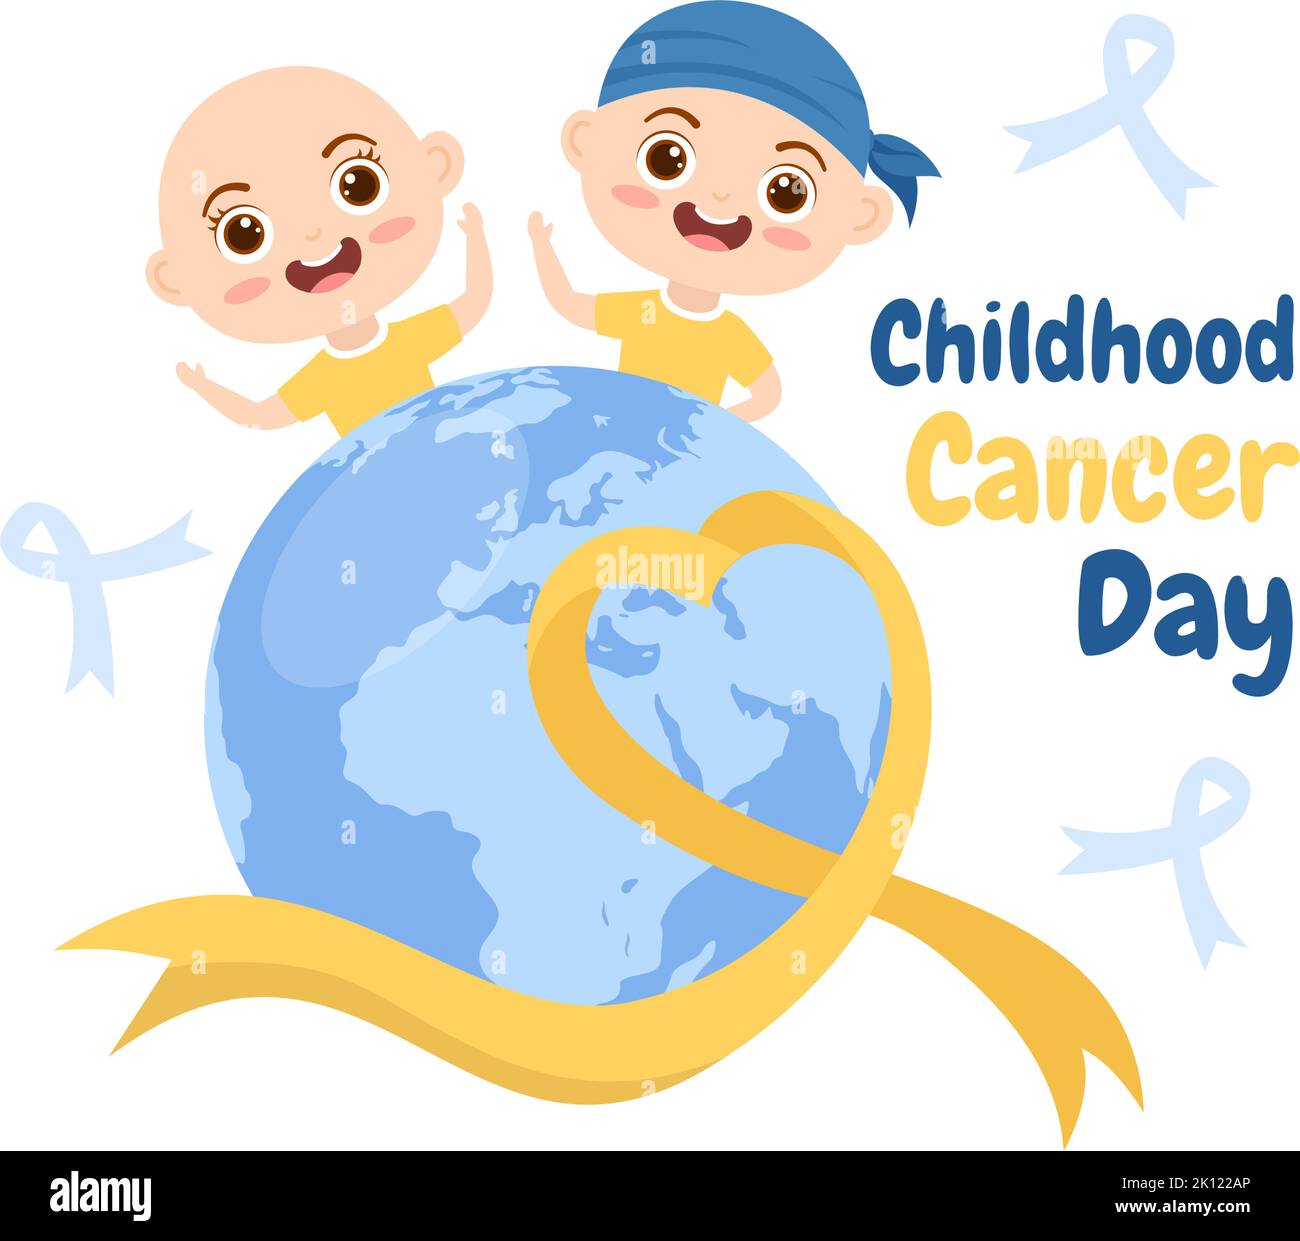 International Childhood Cancer Day Hand Drawn Cartoon Illustration on February 15 for Raising Funds, Promoting the Prevention and Express Support Stock Vector